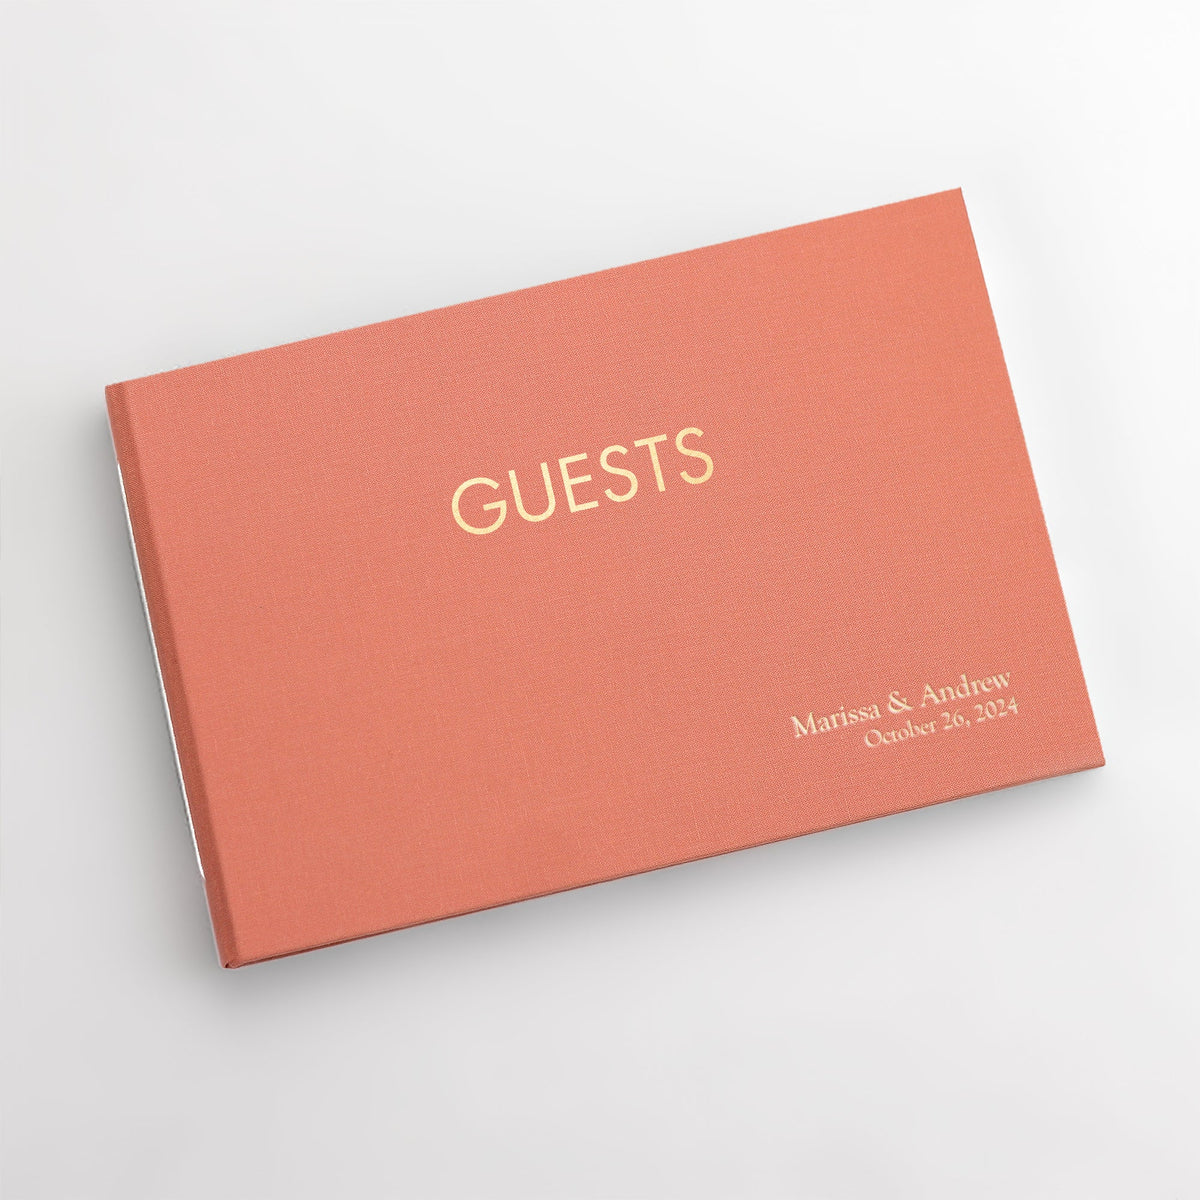 Guestbook Embossed with “Guests” | Cover: Coral Cotton | Available Personalized